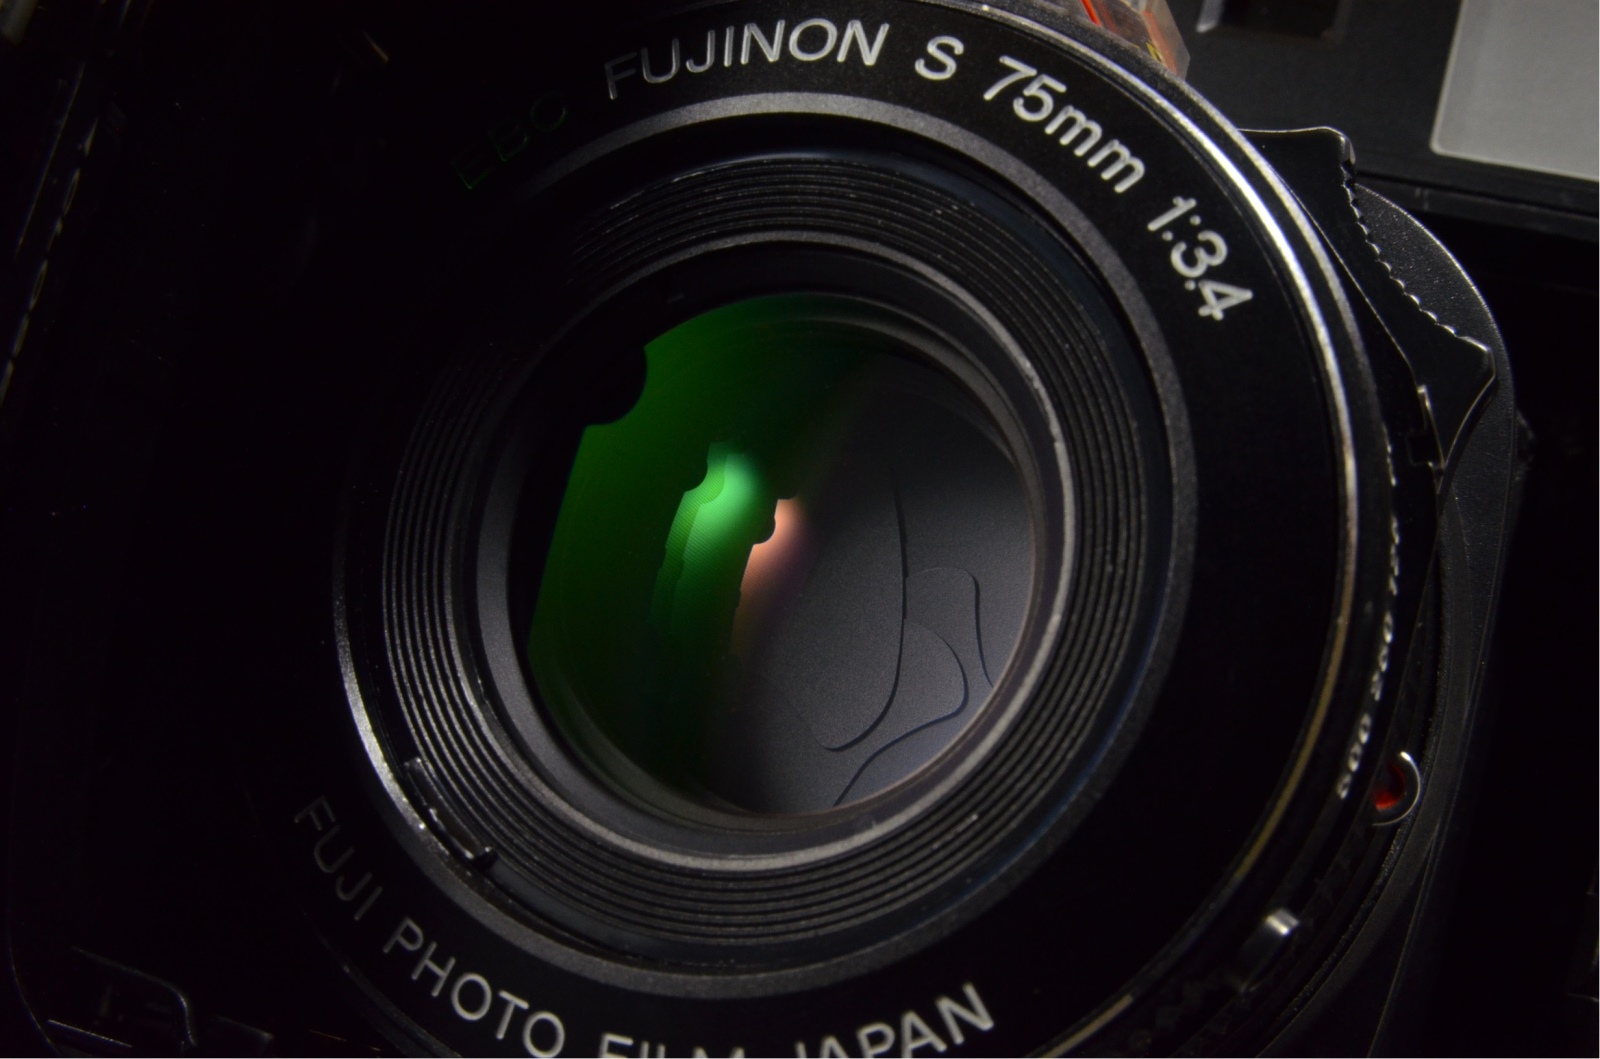 fujifilm fujica gs645 75mm f3.4 with lens hood and filter